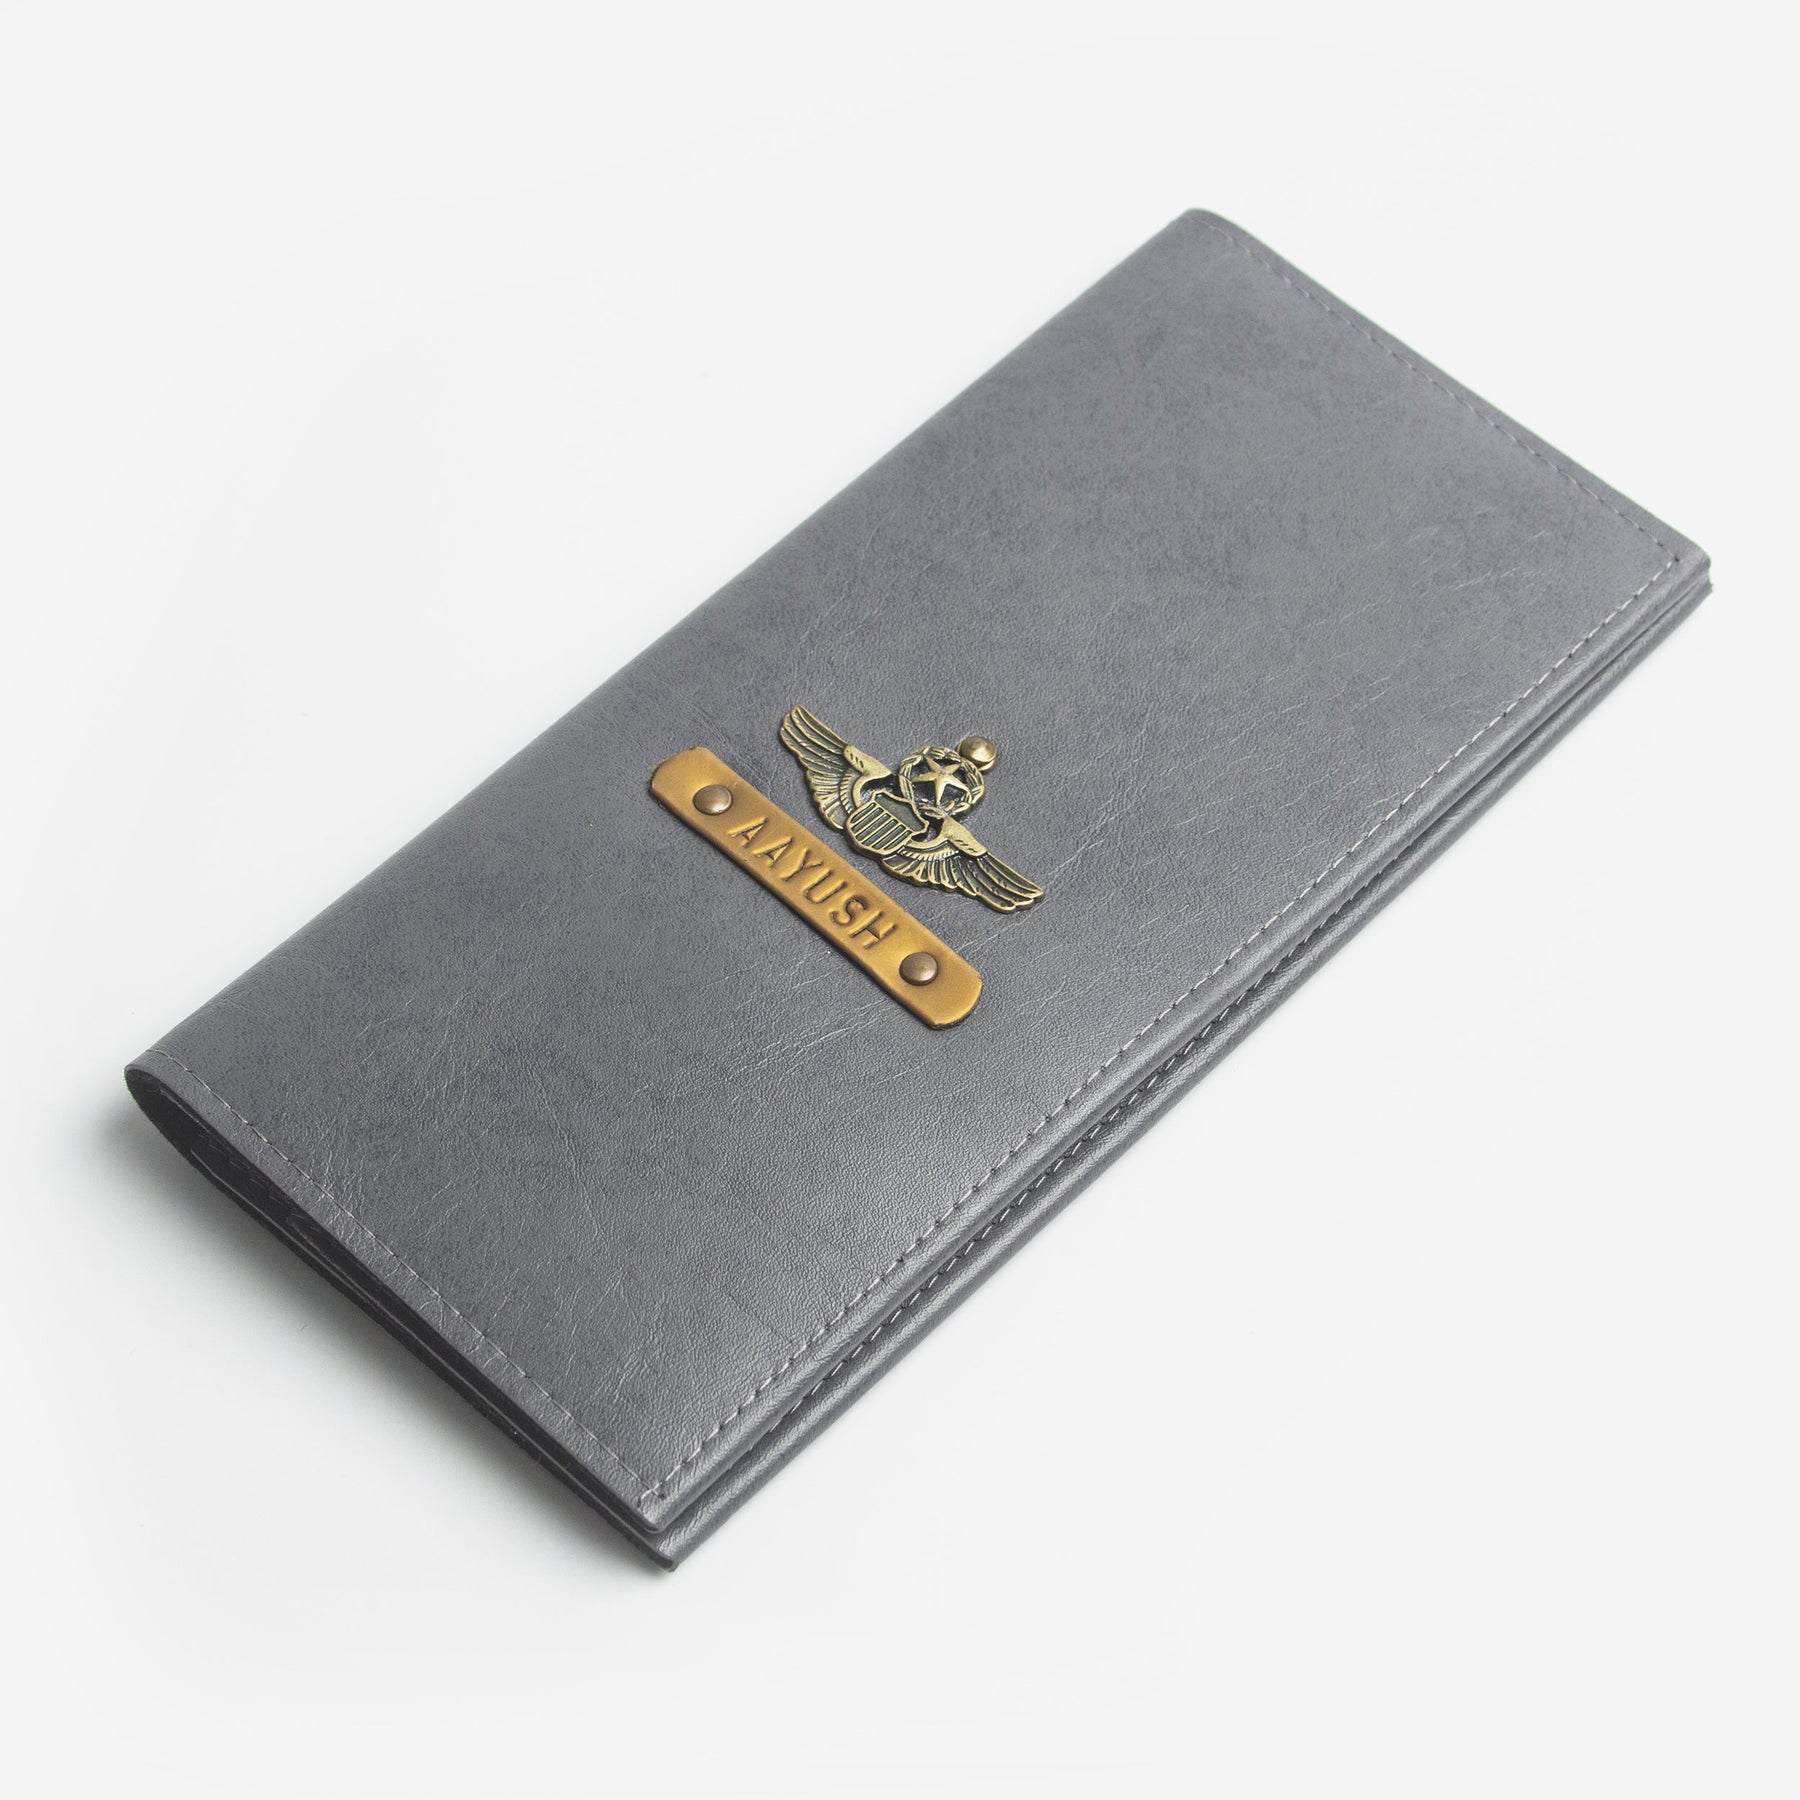 The Messy Corner Travel Wallet Personalized Travel Wallet - Grey